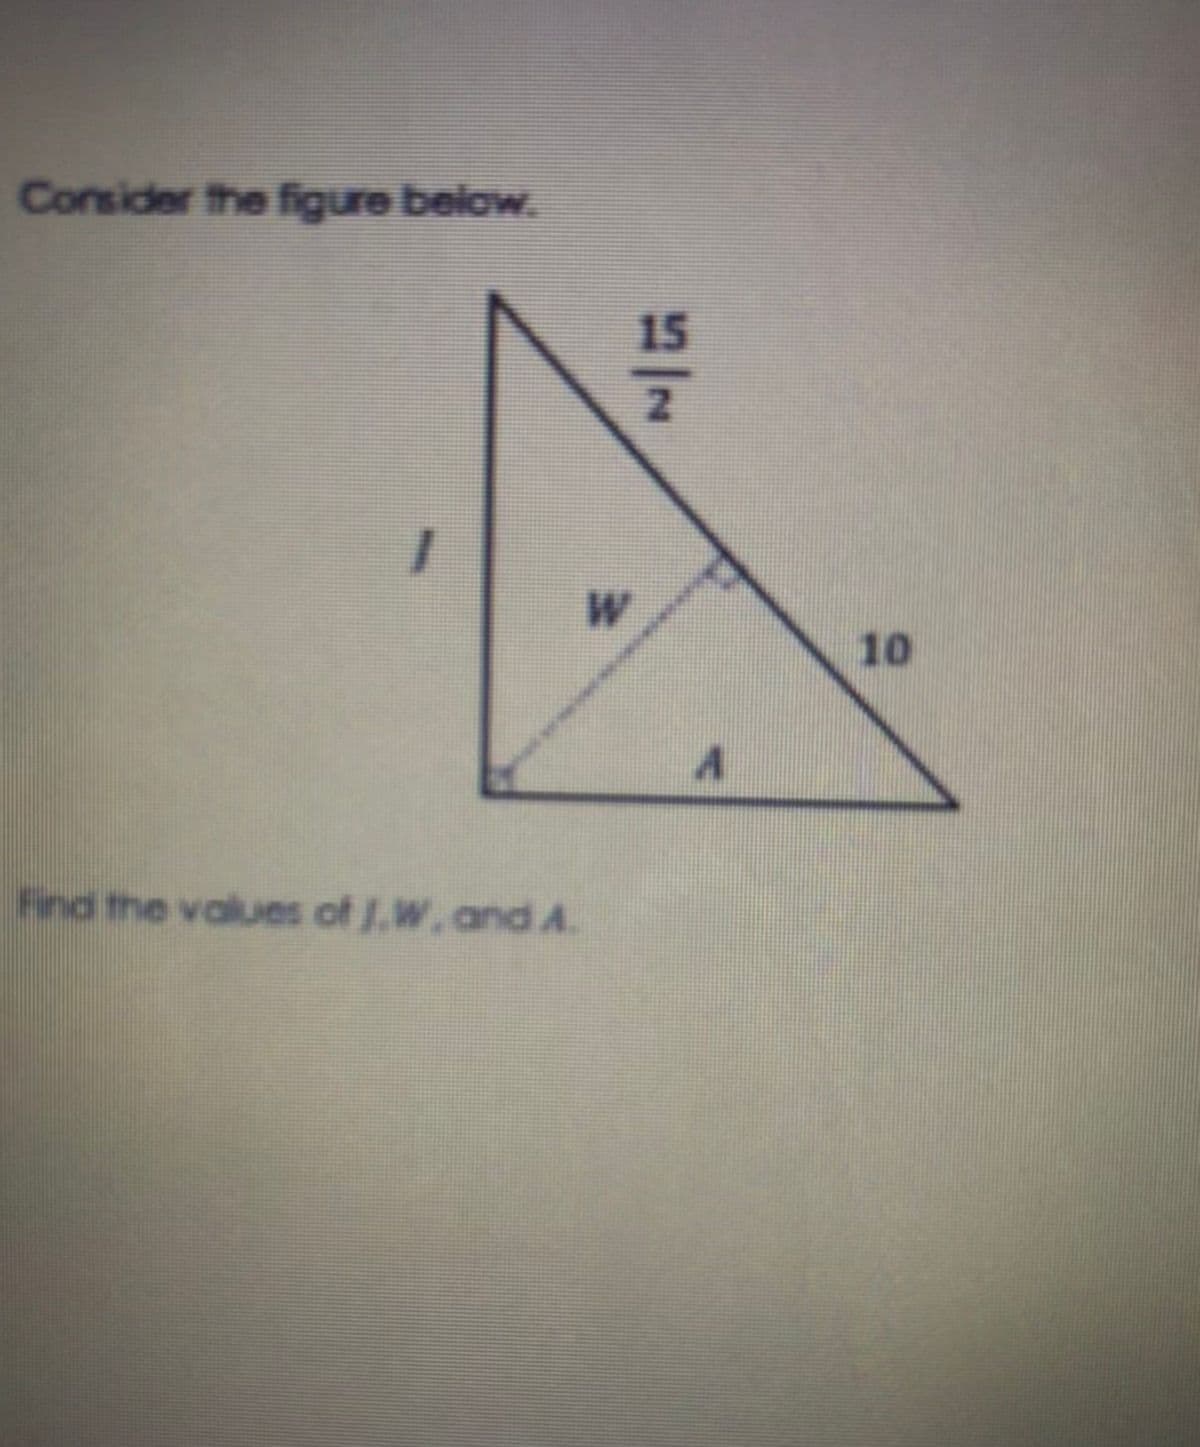 Consider the figure below.
15
W
10
Find the values of J,W, and A.
